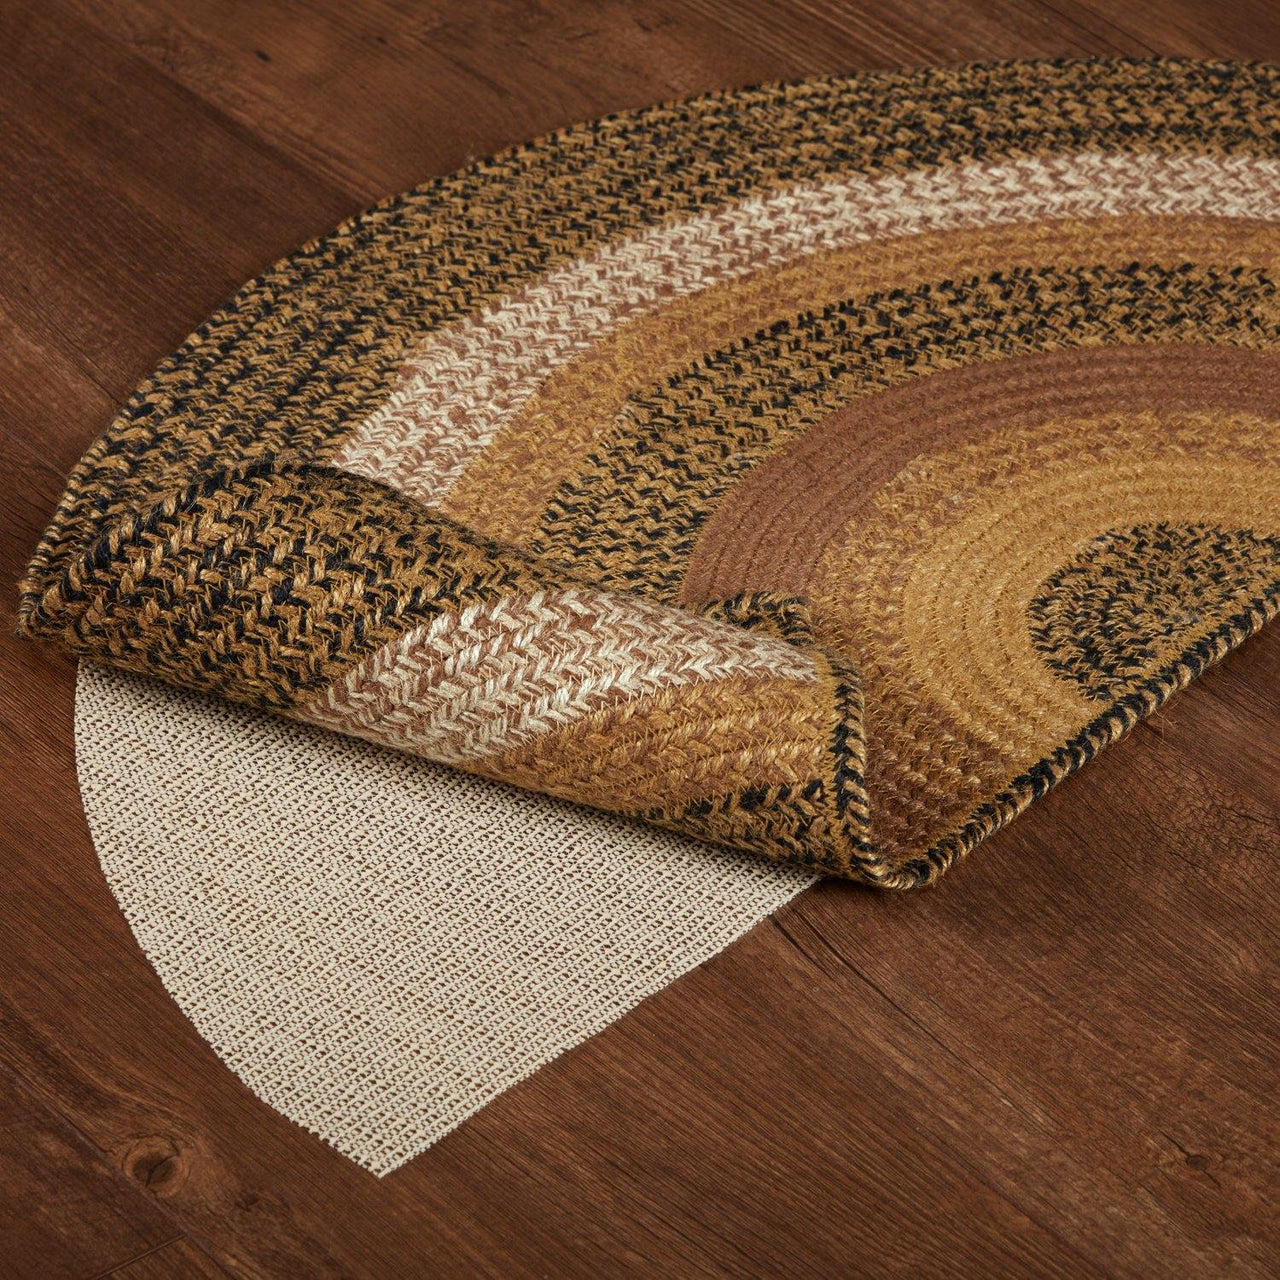 Kettle Grove Jute Braided Rug Half Circle 16.5"x33" with Rug Pad VHC Brands - The Fox Decor